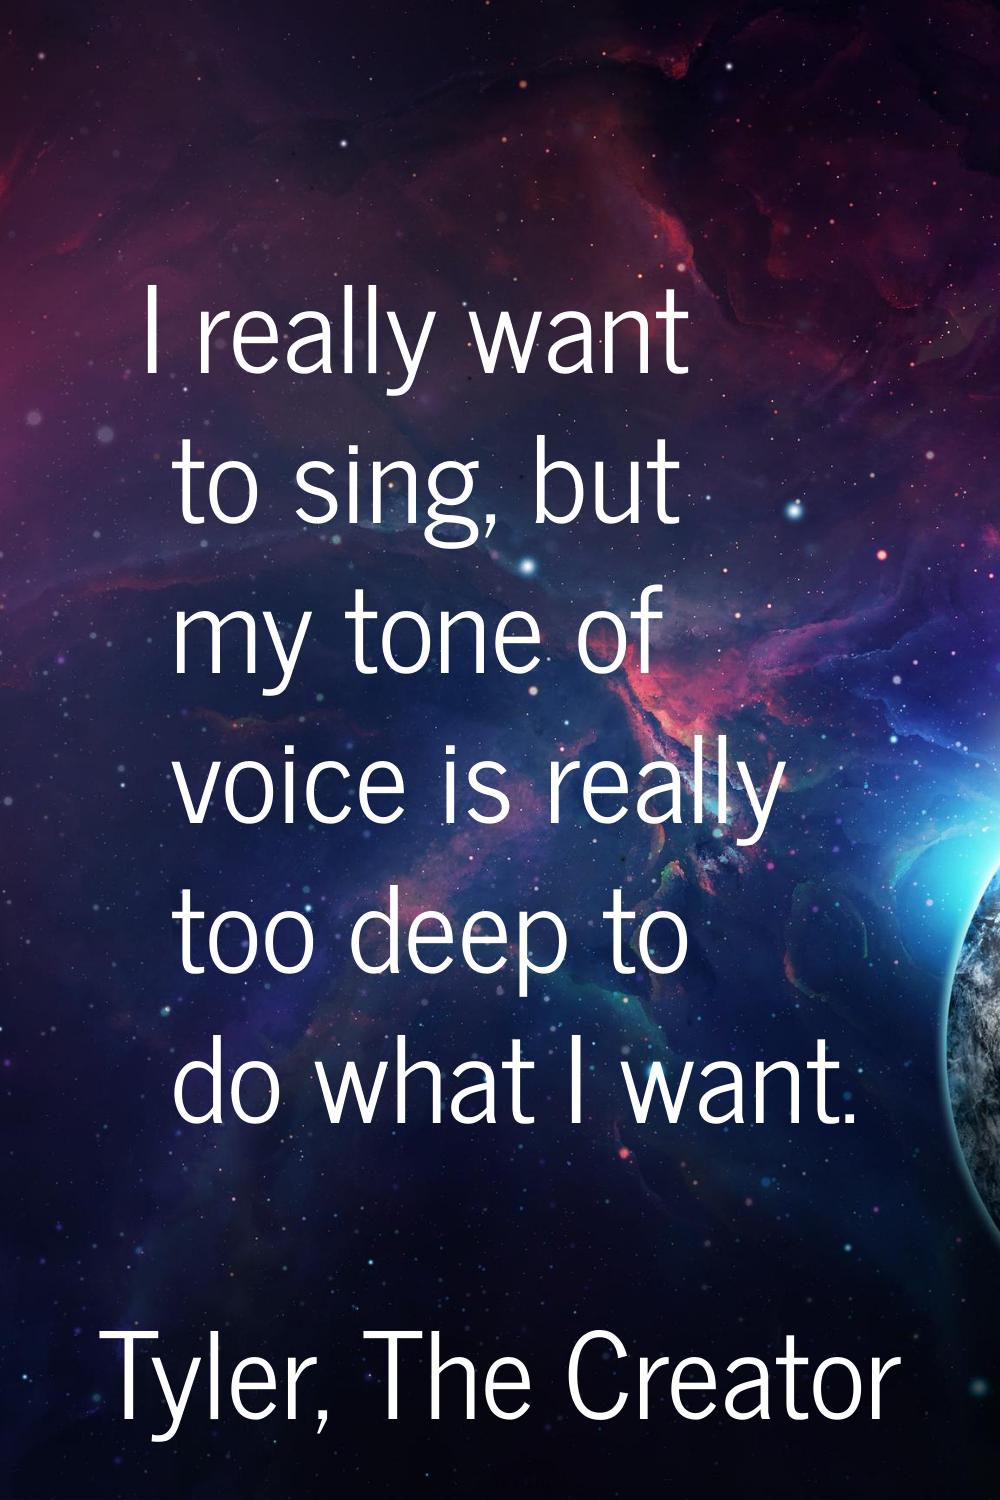 I really want to sing, but my tone of voice is really too deep to do what I want.